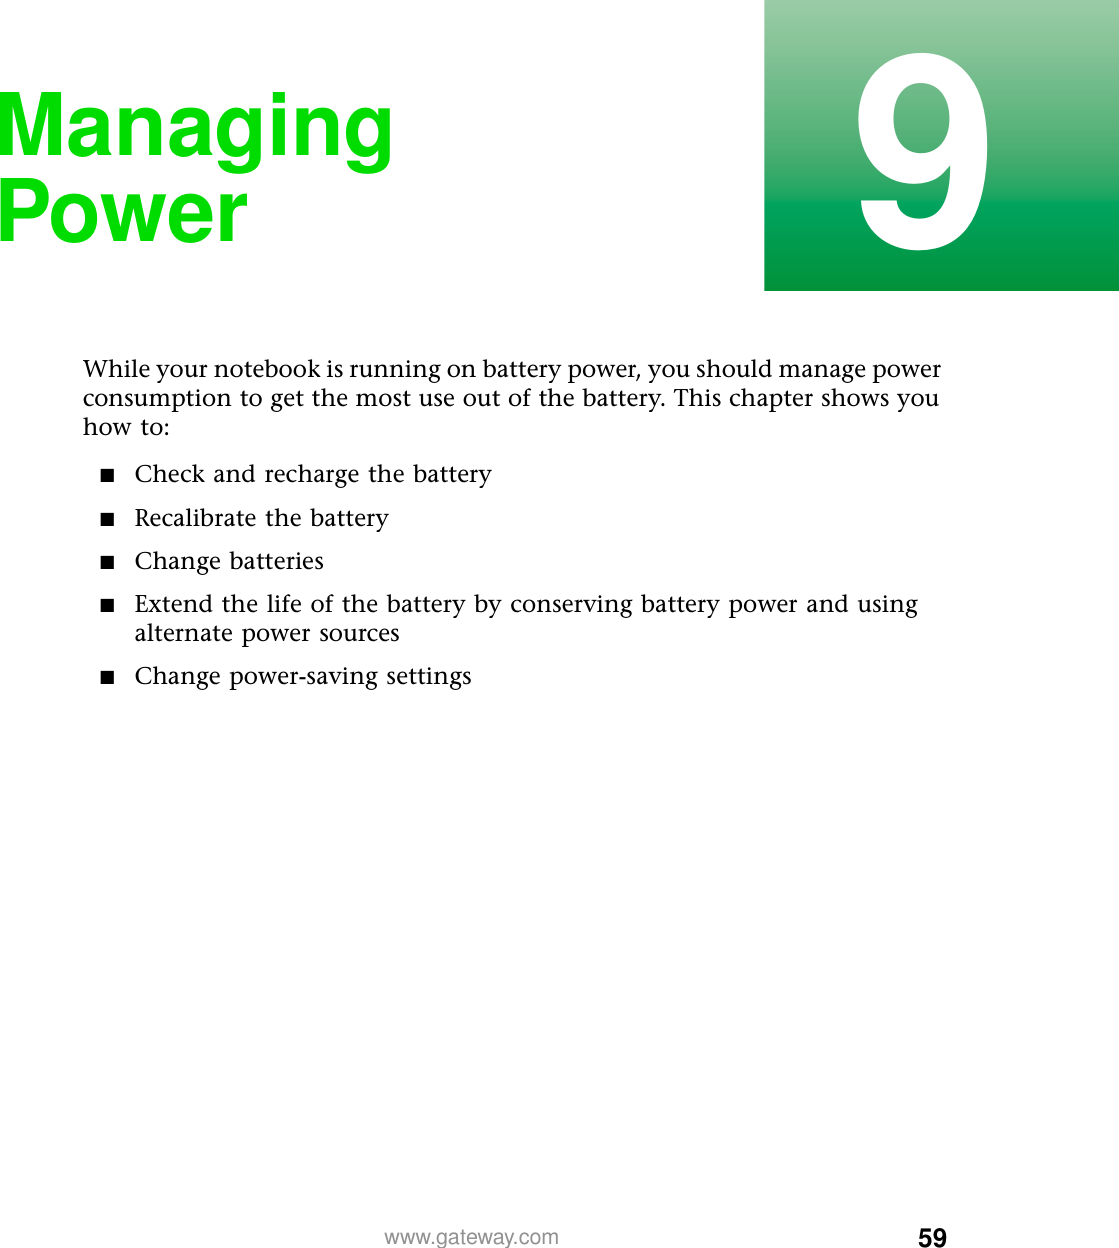 599www.gateway.comManaging PowerWhile your notebook is running on battery power, you should manage power consumption to get the most use out of the battery. This chapter shows you how to:■Check and recharge the battery■Recalibrate the battery■Change batteries■Extend the life of the battery by conserving battery power and using alternate power sources■Change power-saving settings